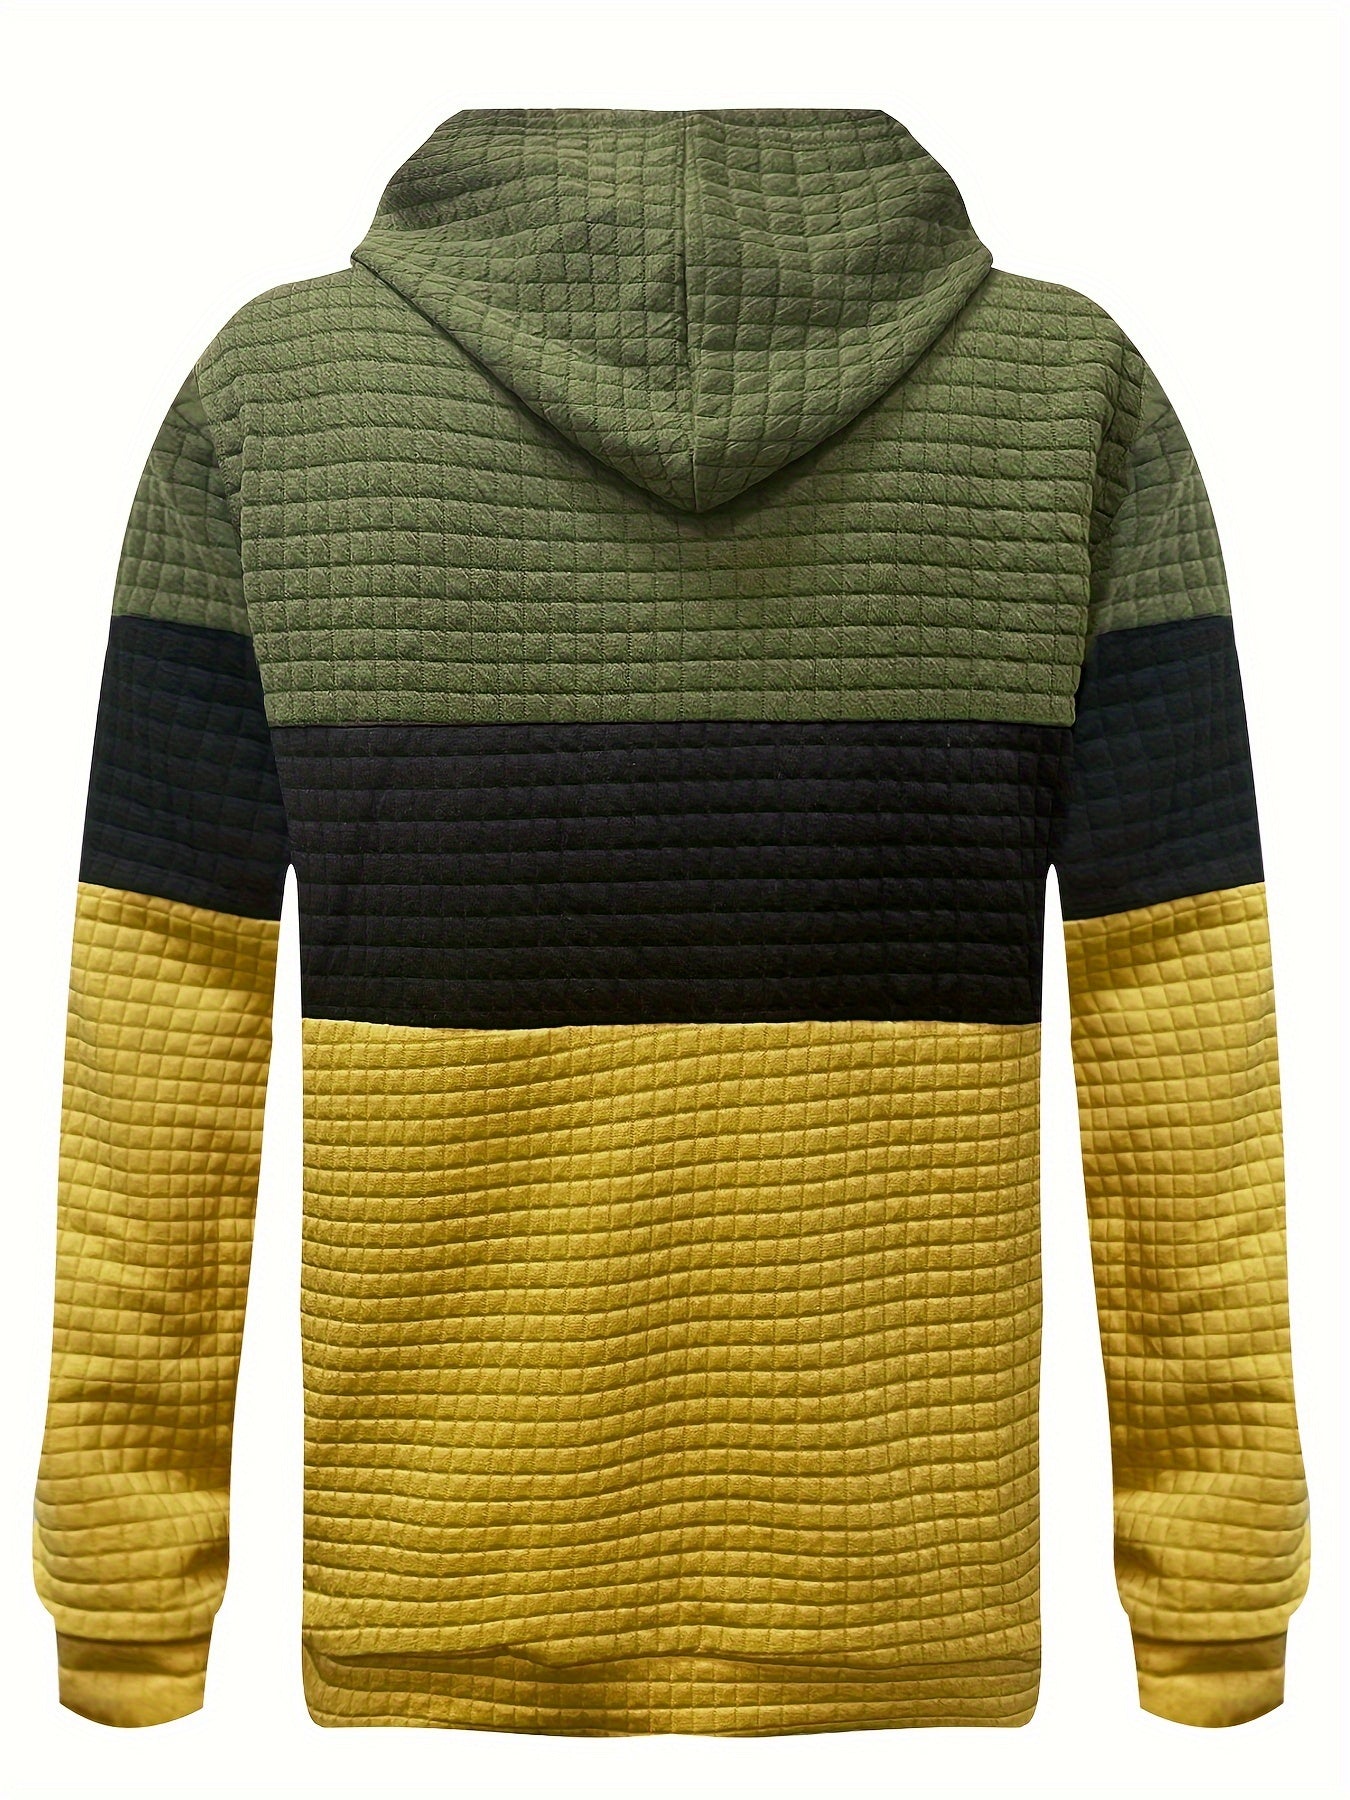 Color Block Cool Hoodies For Men, Men's Casual Waffle Pattern Pullover Hooded Sweatshirt With Kangaroo Pocket Streetwear For Winter Fall, As Gifts